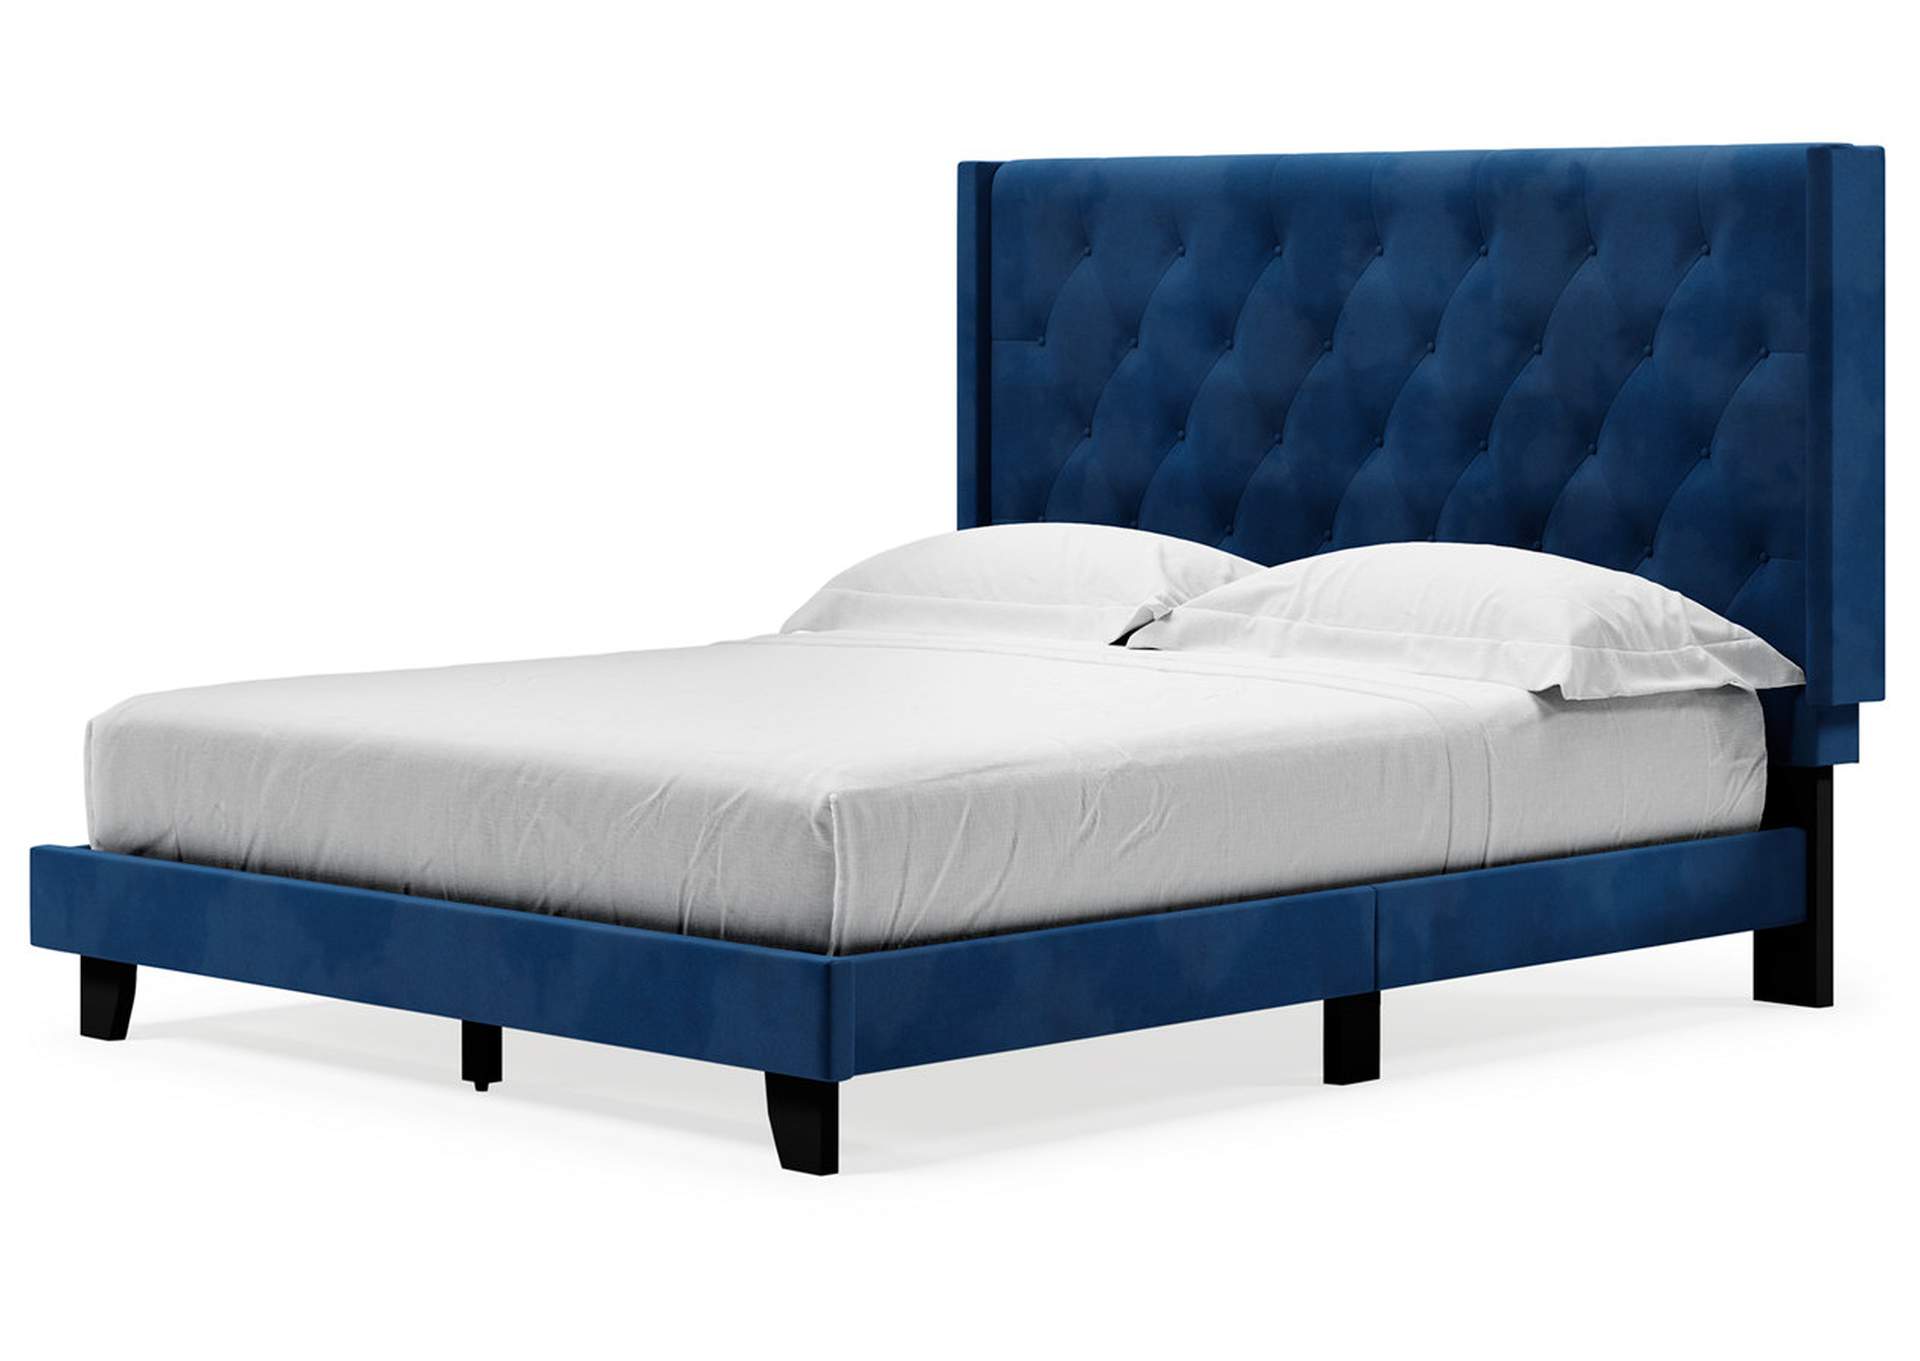 Vintasso Queen Upholstered Bed,Signature Design By Ashley